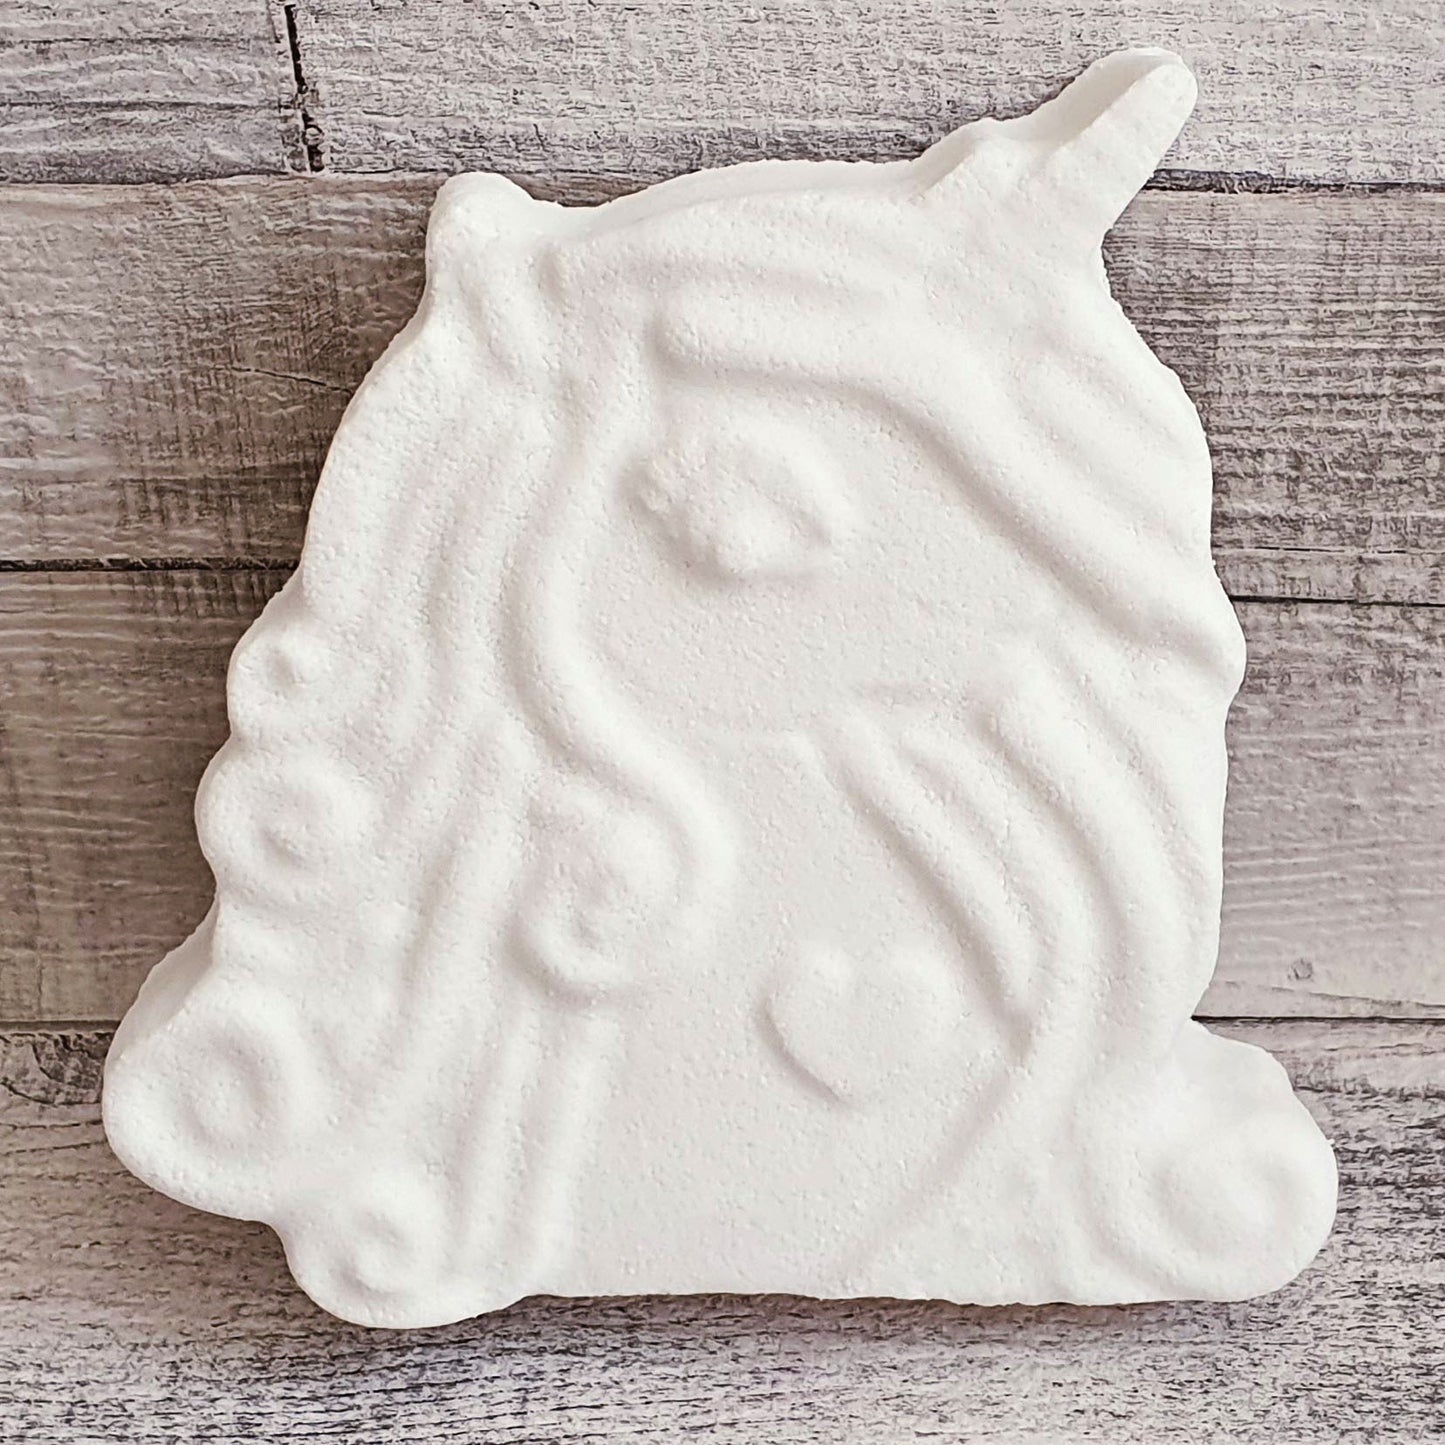 Yuna Unicorn Mould | Truly Personal | Bath Bomb, Soap, Resin, Chocolate, Jelly, Wax Melts Mold